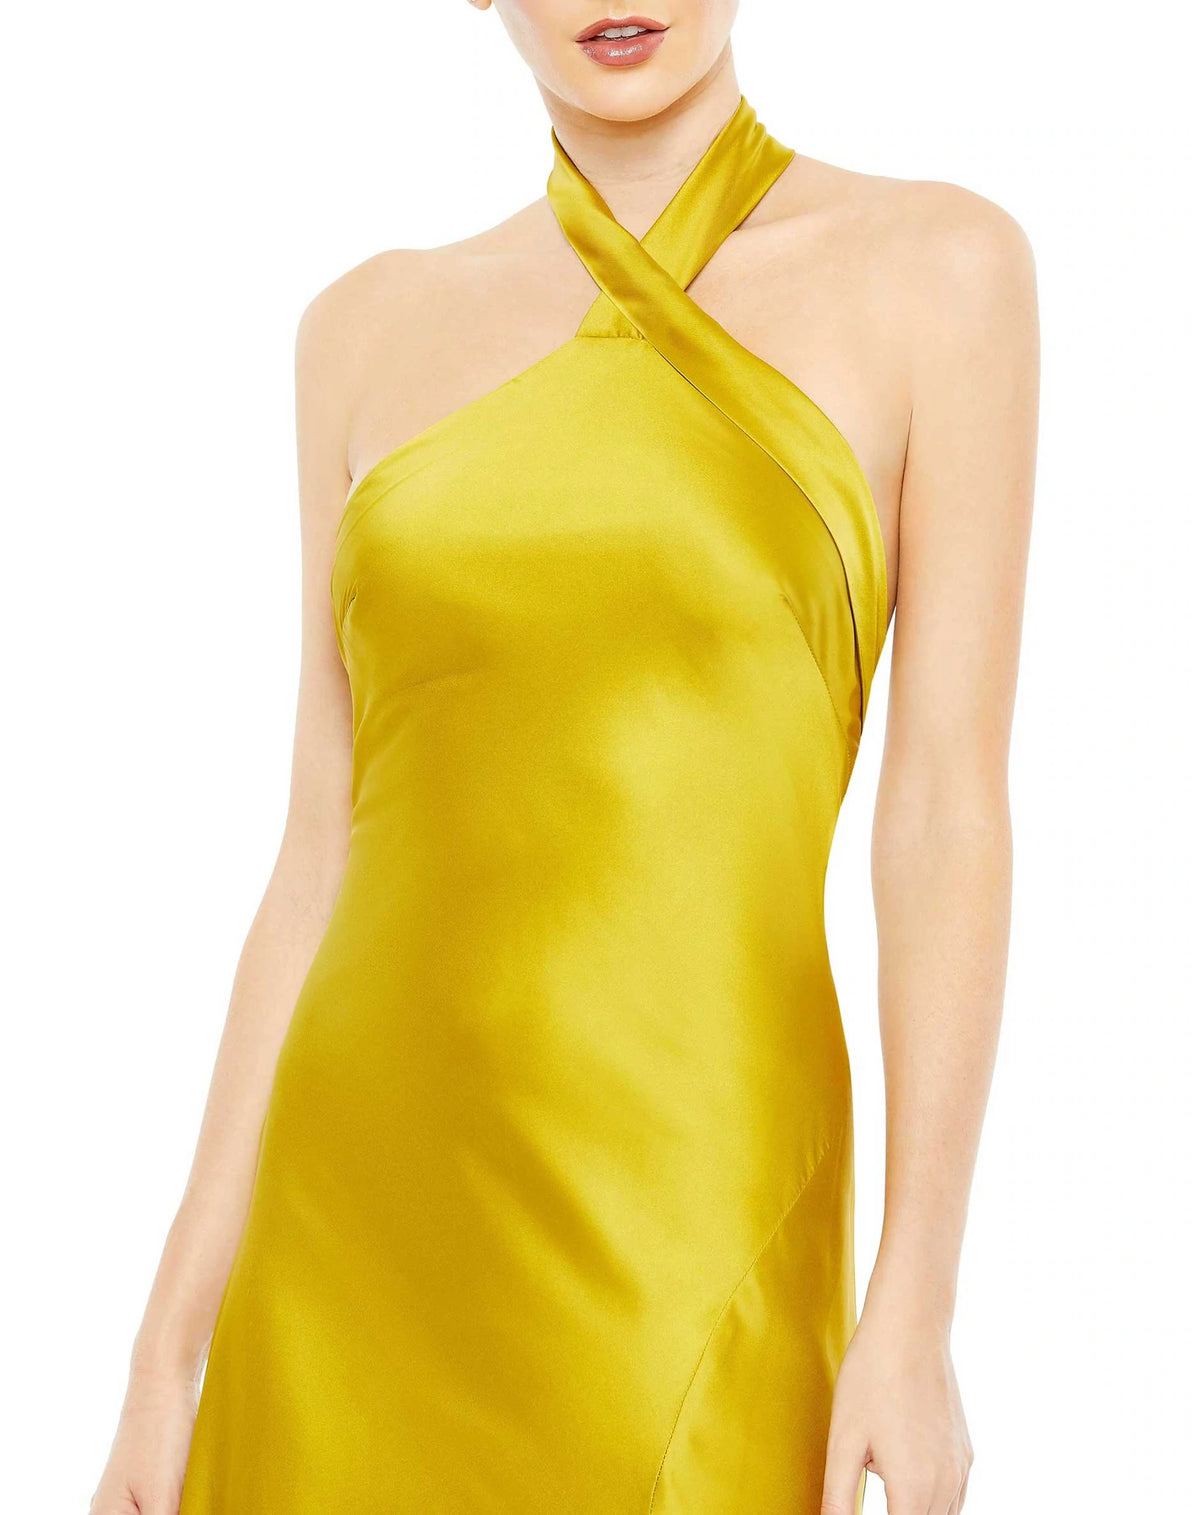 Made in a stunning shade of chartreuse, this elegant and sophisticated, silky satin gown features a twister halter neck, fitted body and one sexy thigh high split formed from a sexy train.  The dress, with its show-stopping colour will be sure to have all eyes on you close up